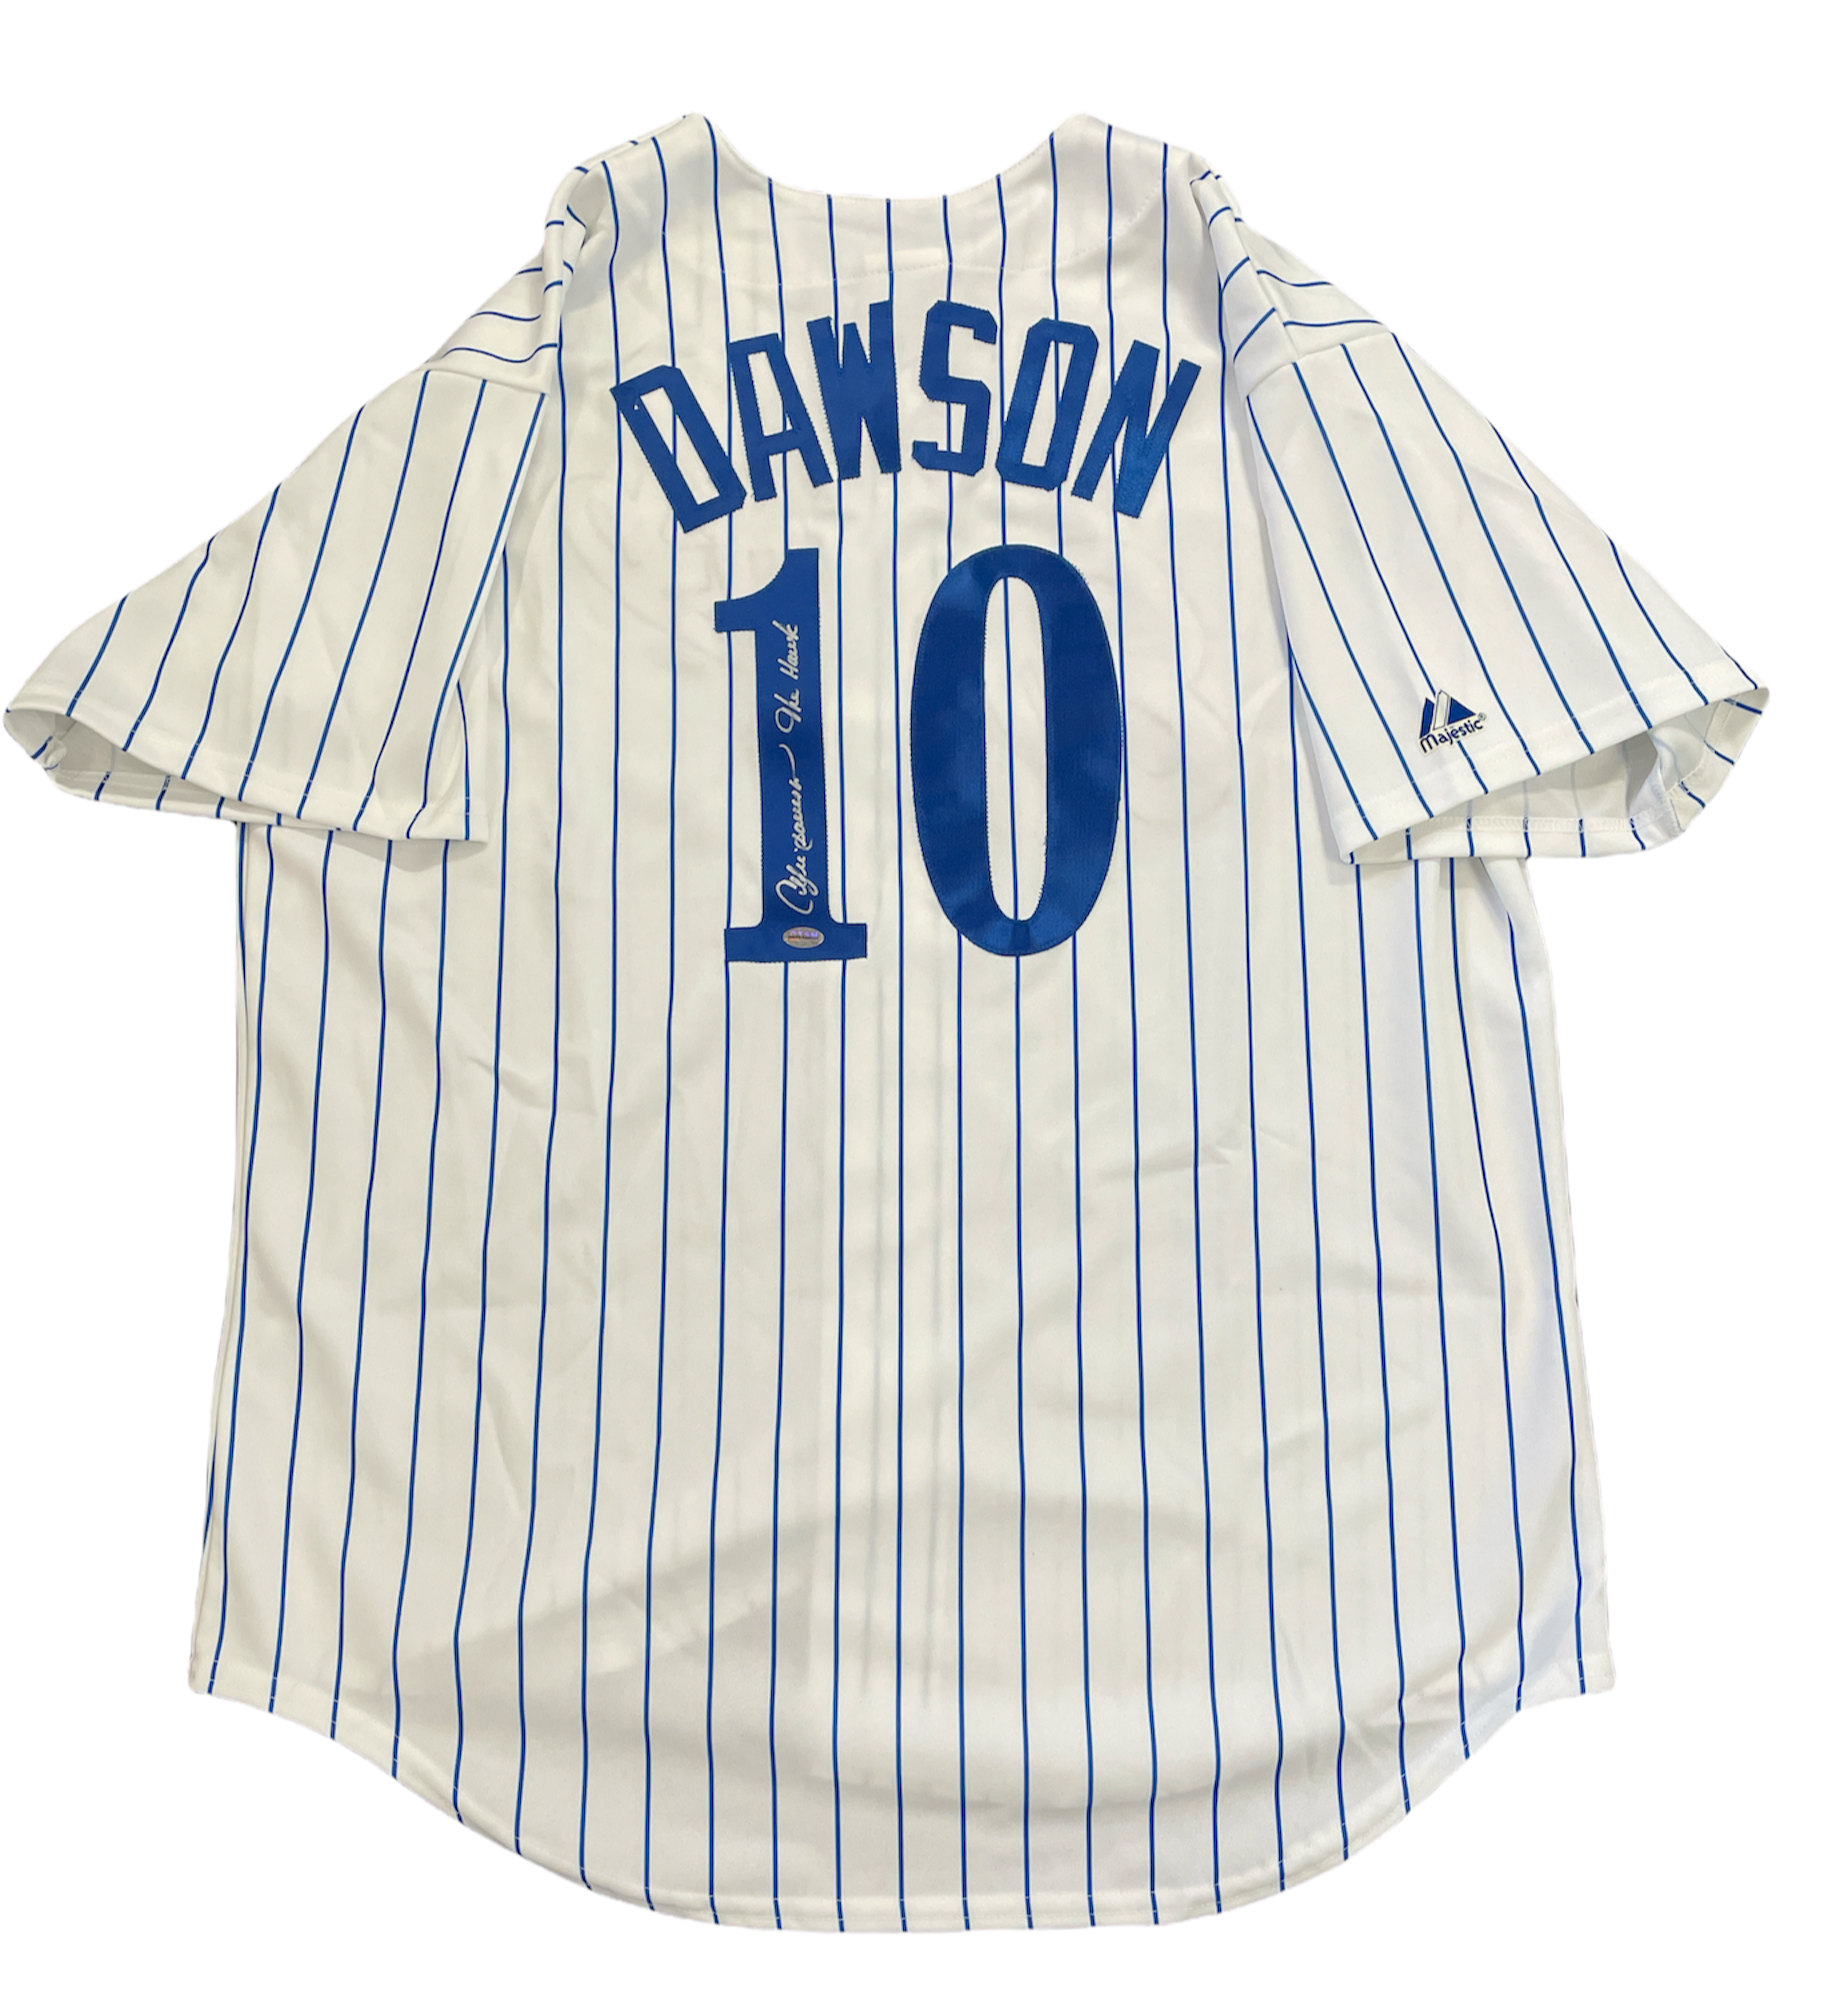 Andre Dawson Signed Montreal Expos Jersey (JSA COA)